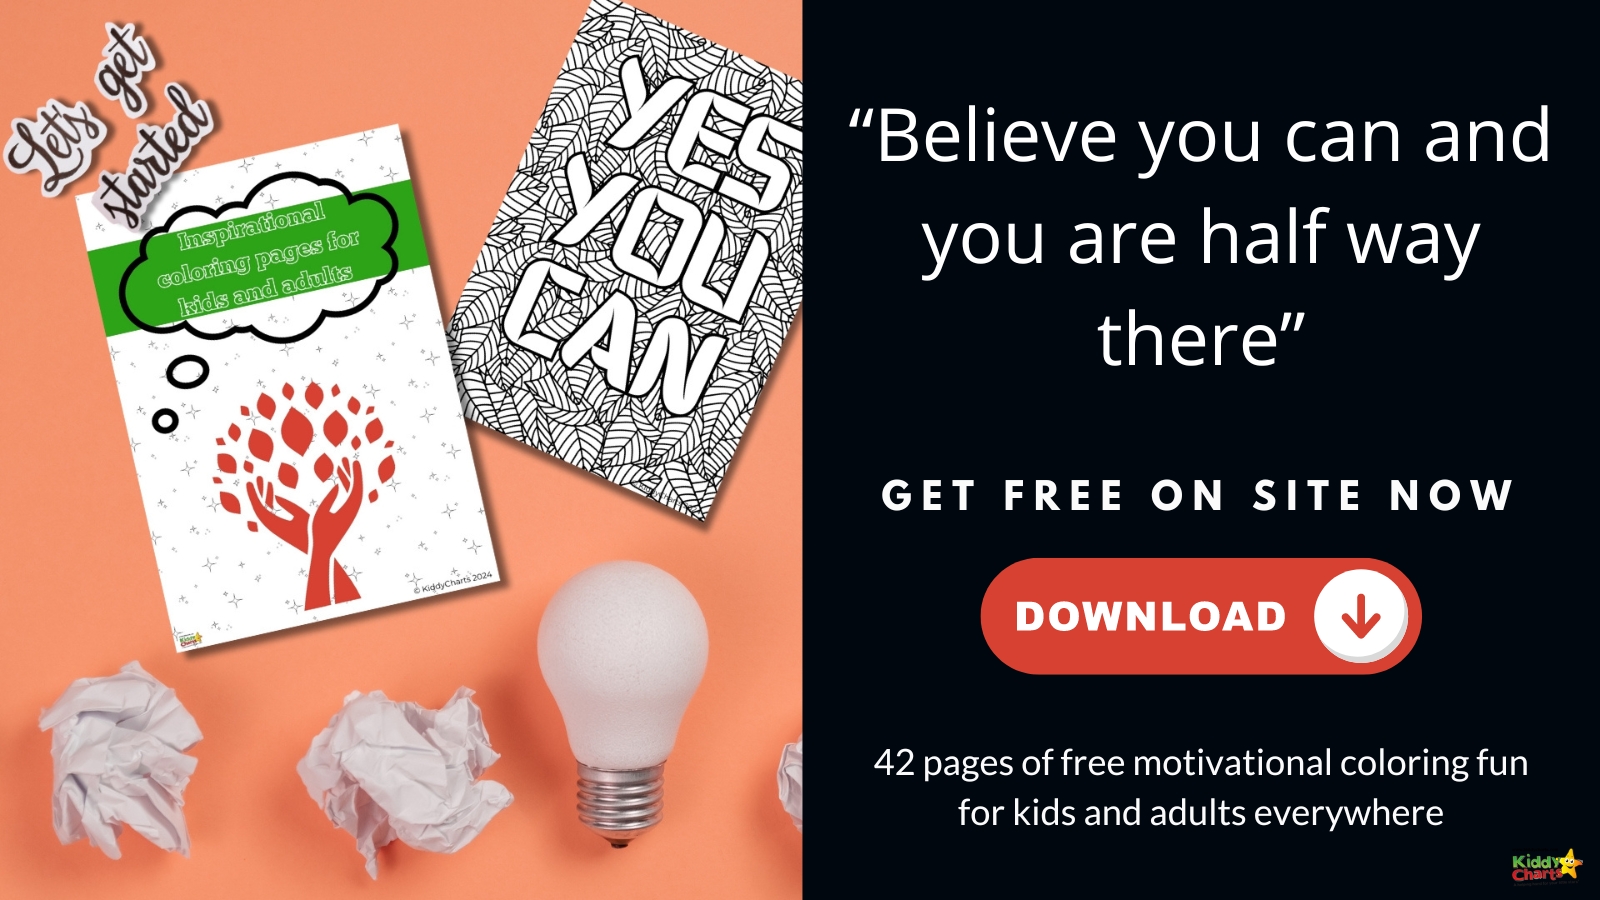 Inspiration coloring pages printable: Plus our free motivational coloring book